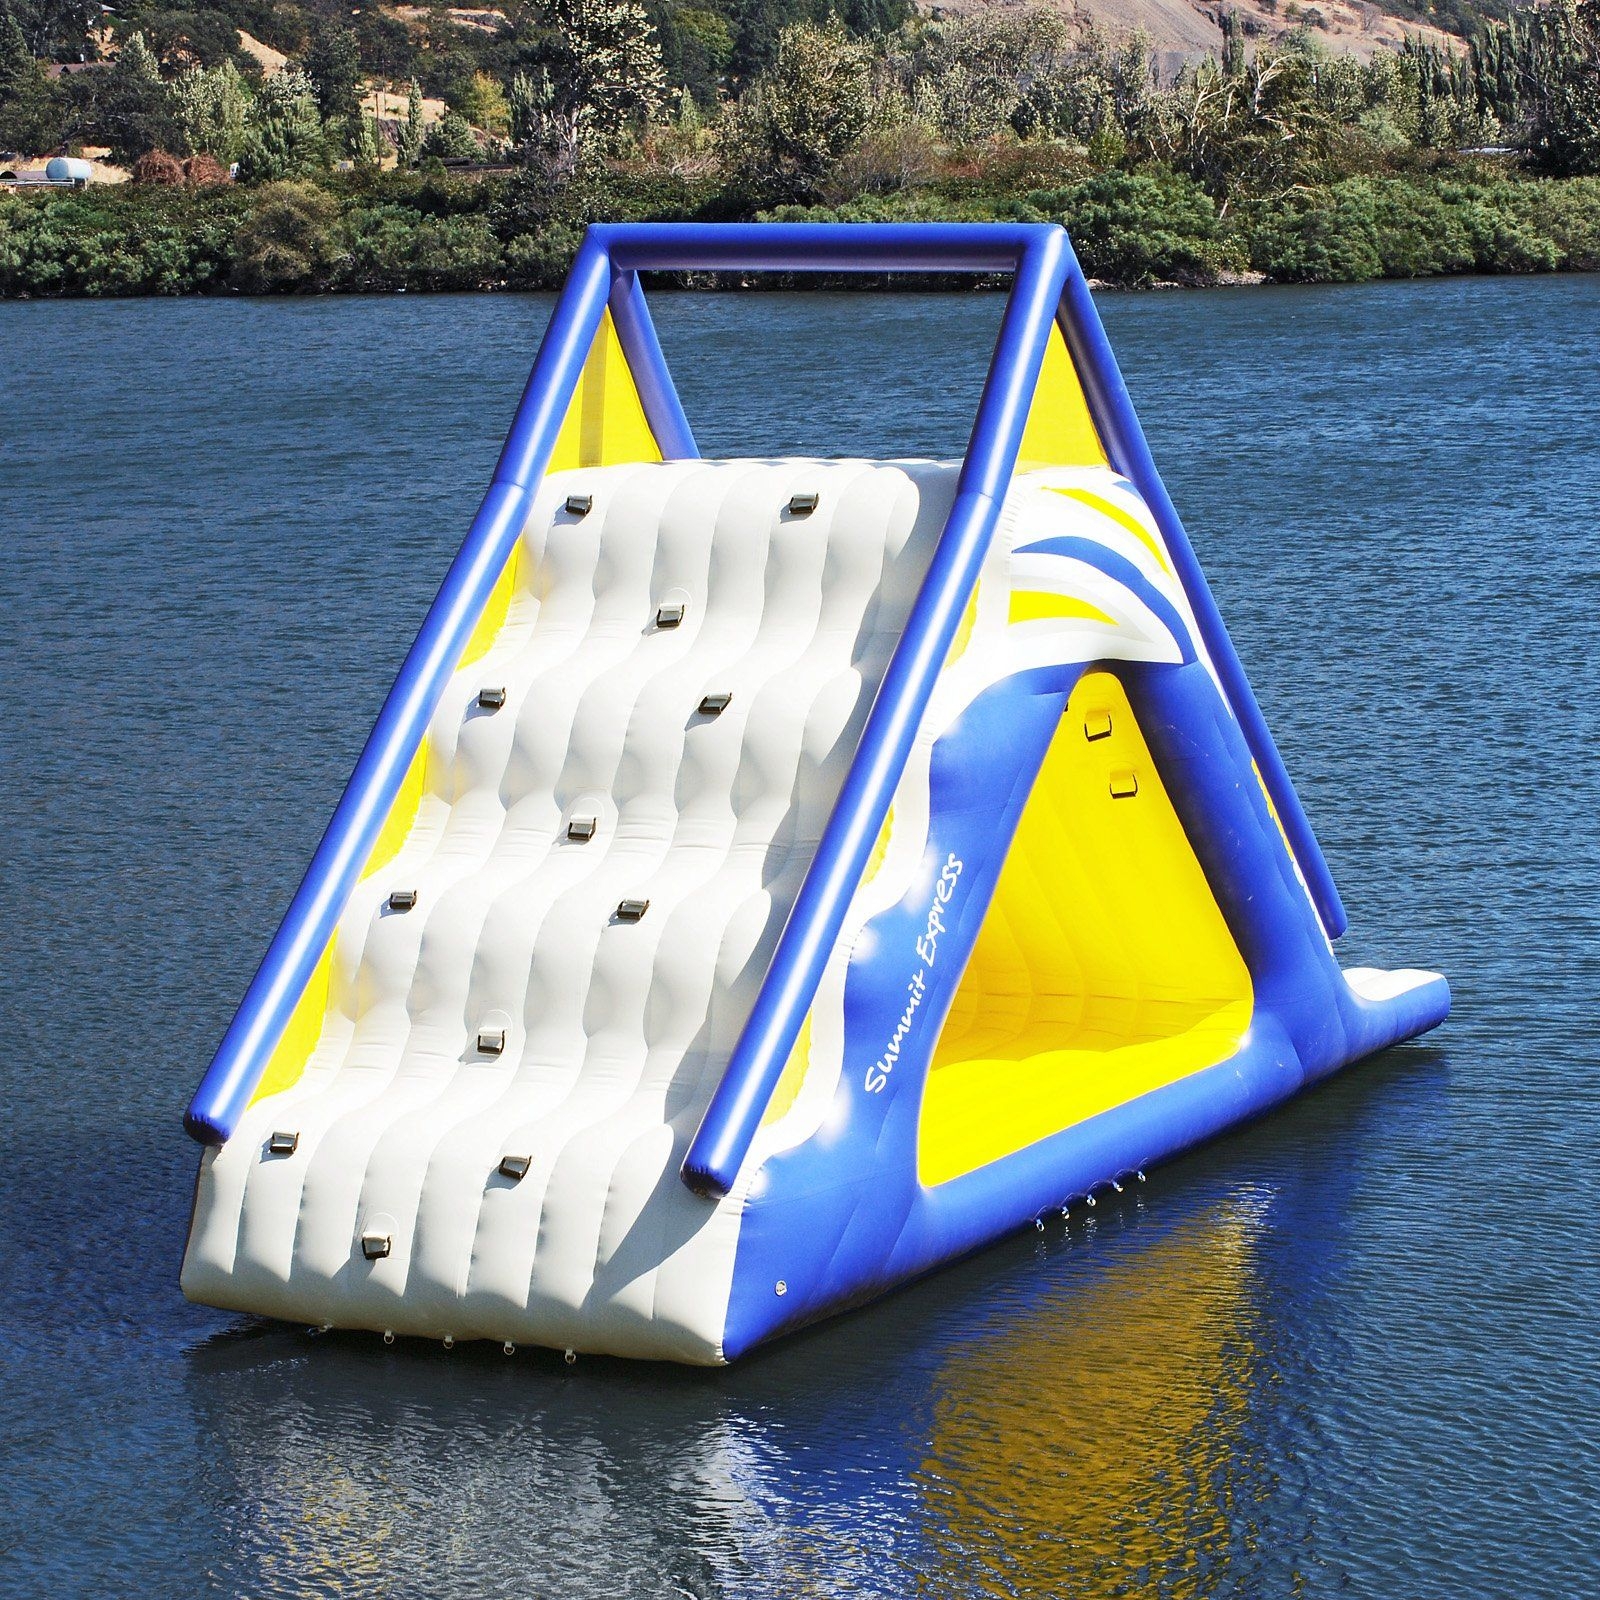 A gigantic water play slide this would be fun at